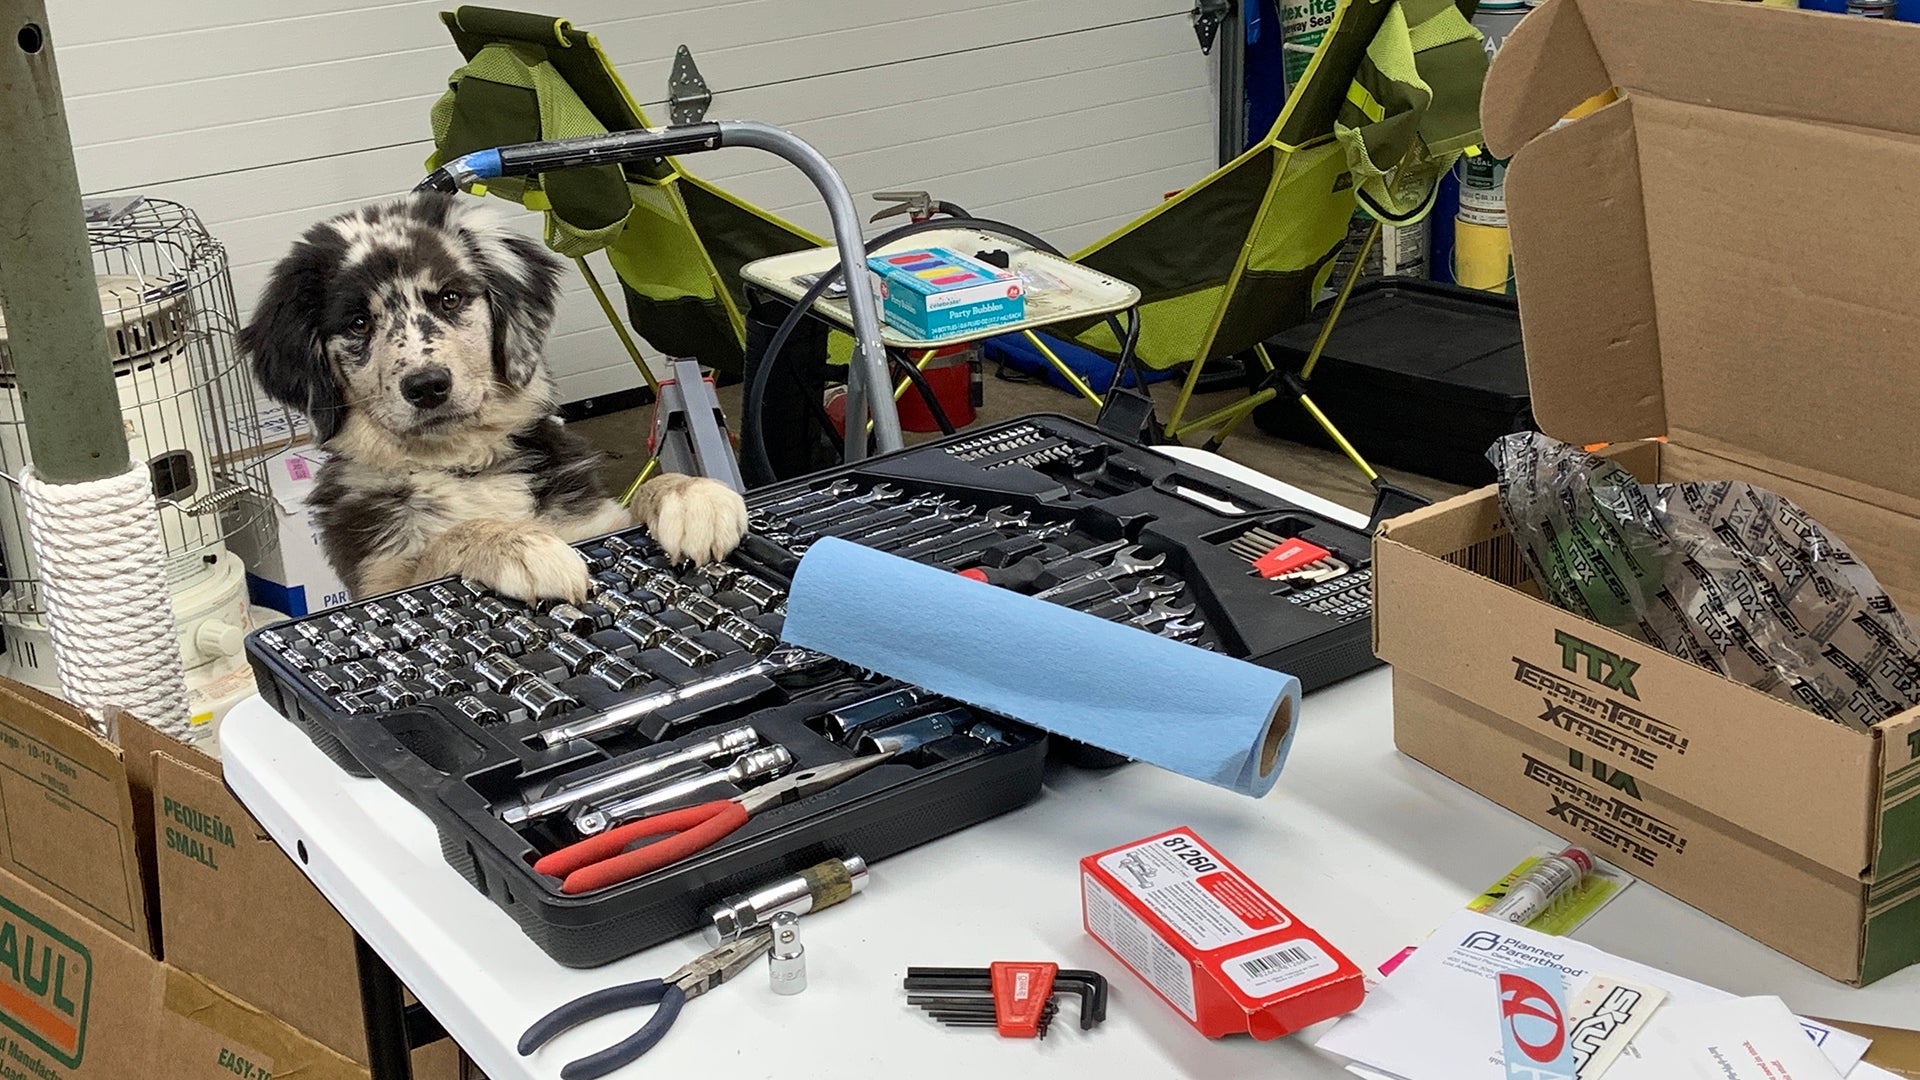 Dog playing with tools